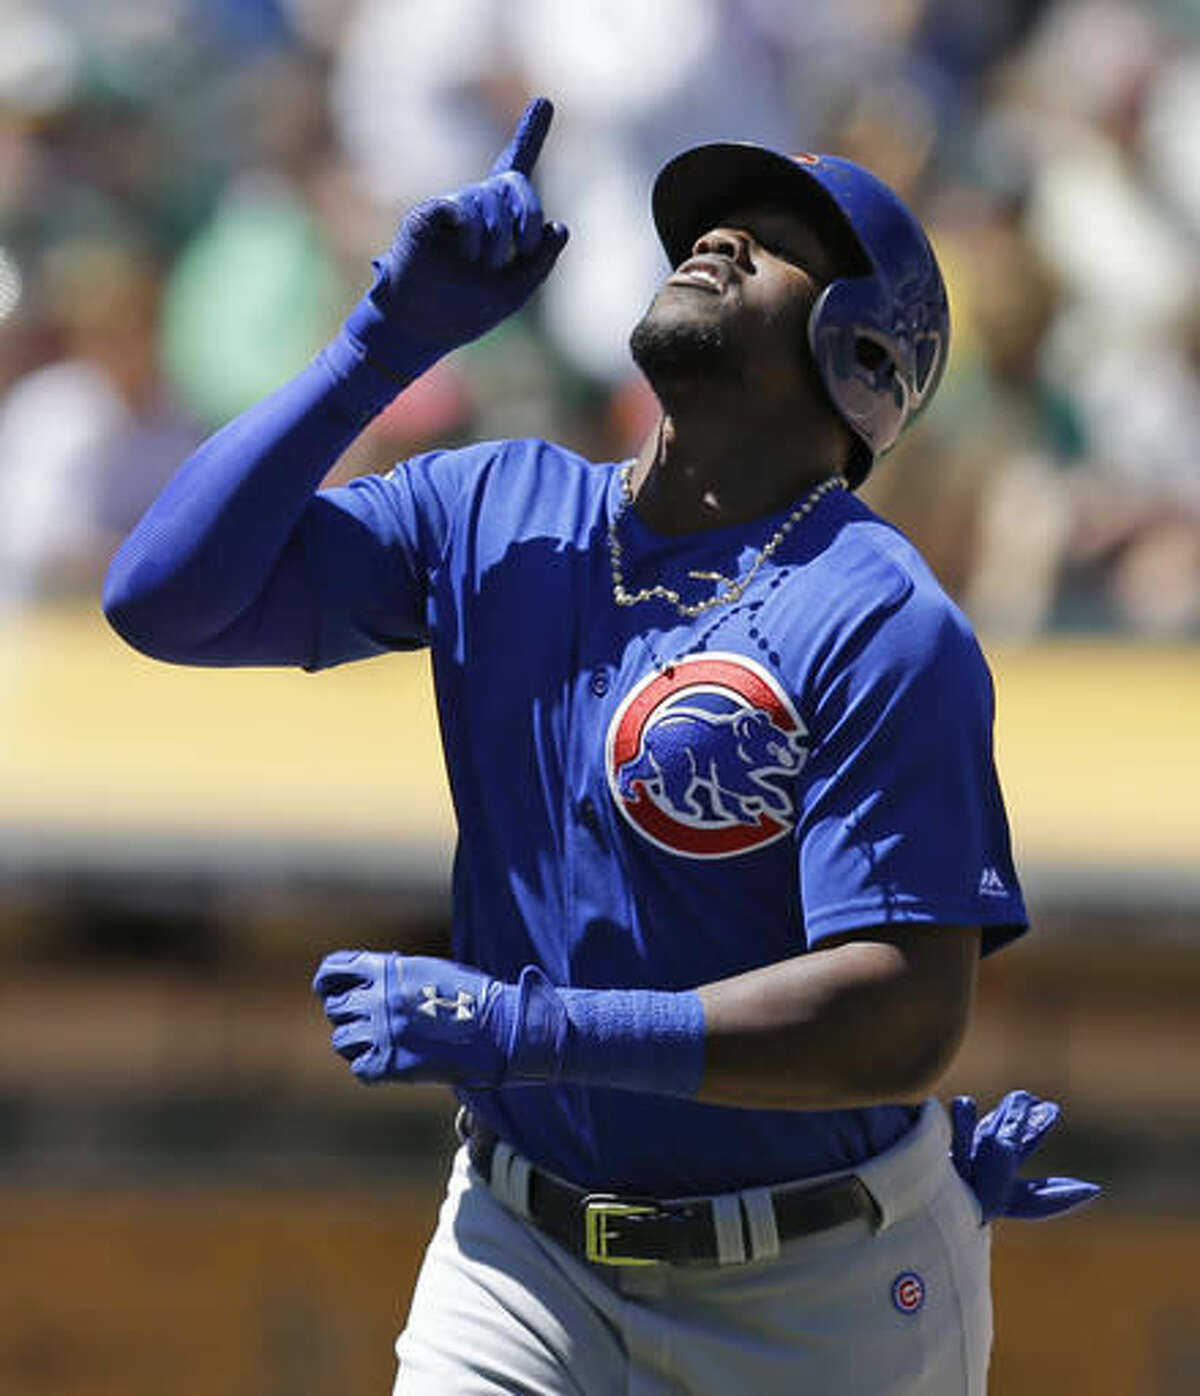 Chicago Cubs' Jorge Soler celebrates after hitting a home run off Oakland Athletics' Sean Manaea in the seventh inning of a baseball game Sunday, Aug. 7, 2016, in Oakland, Calif. (AP Photo/Ben Margot)